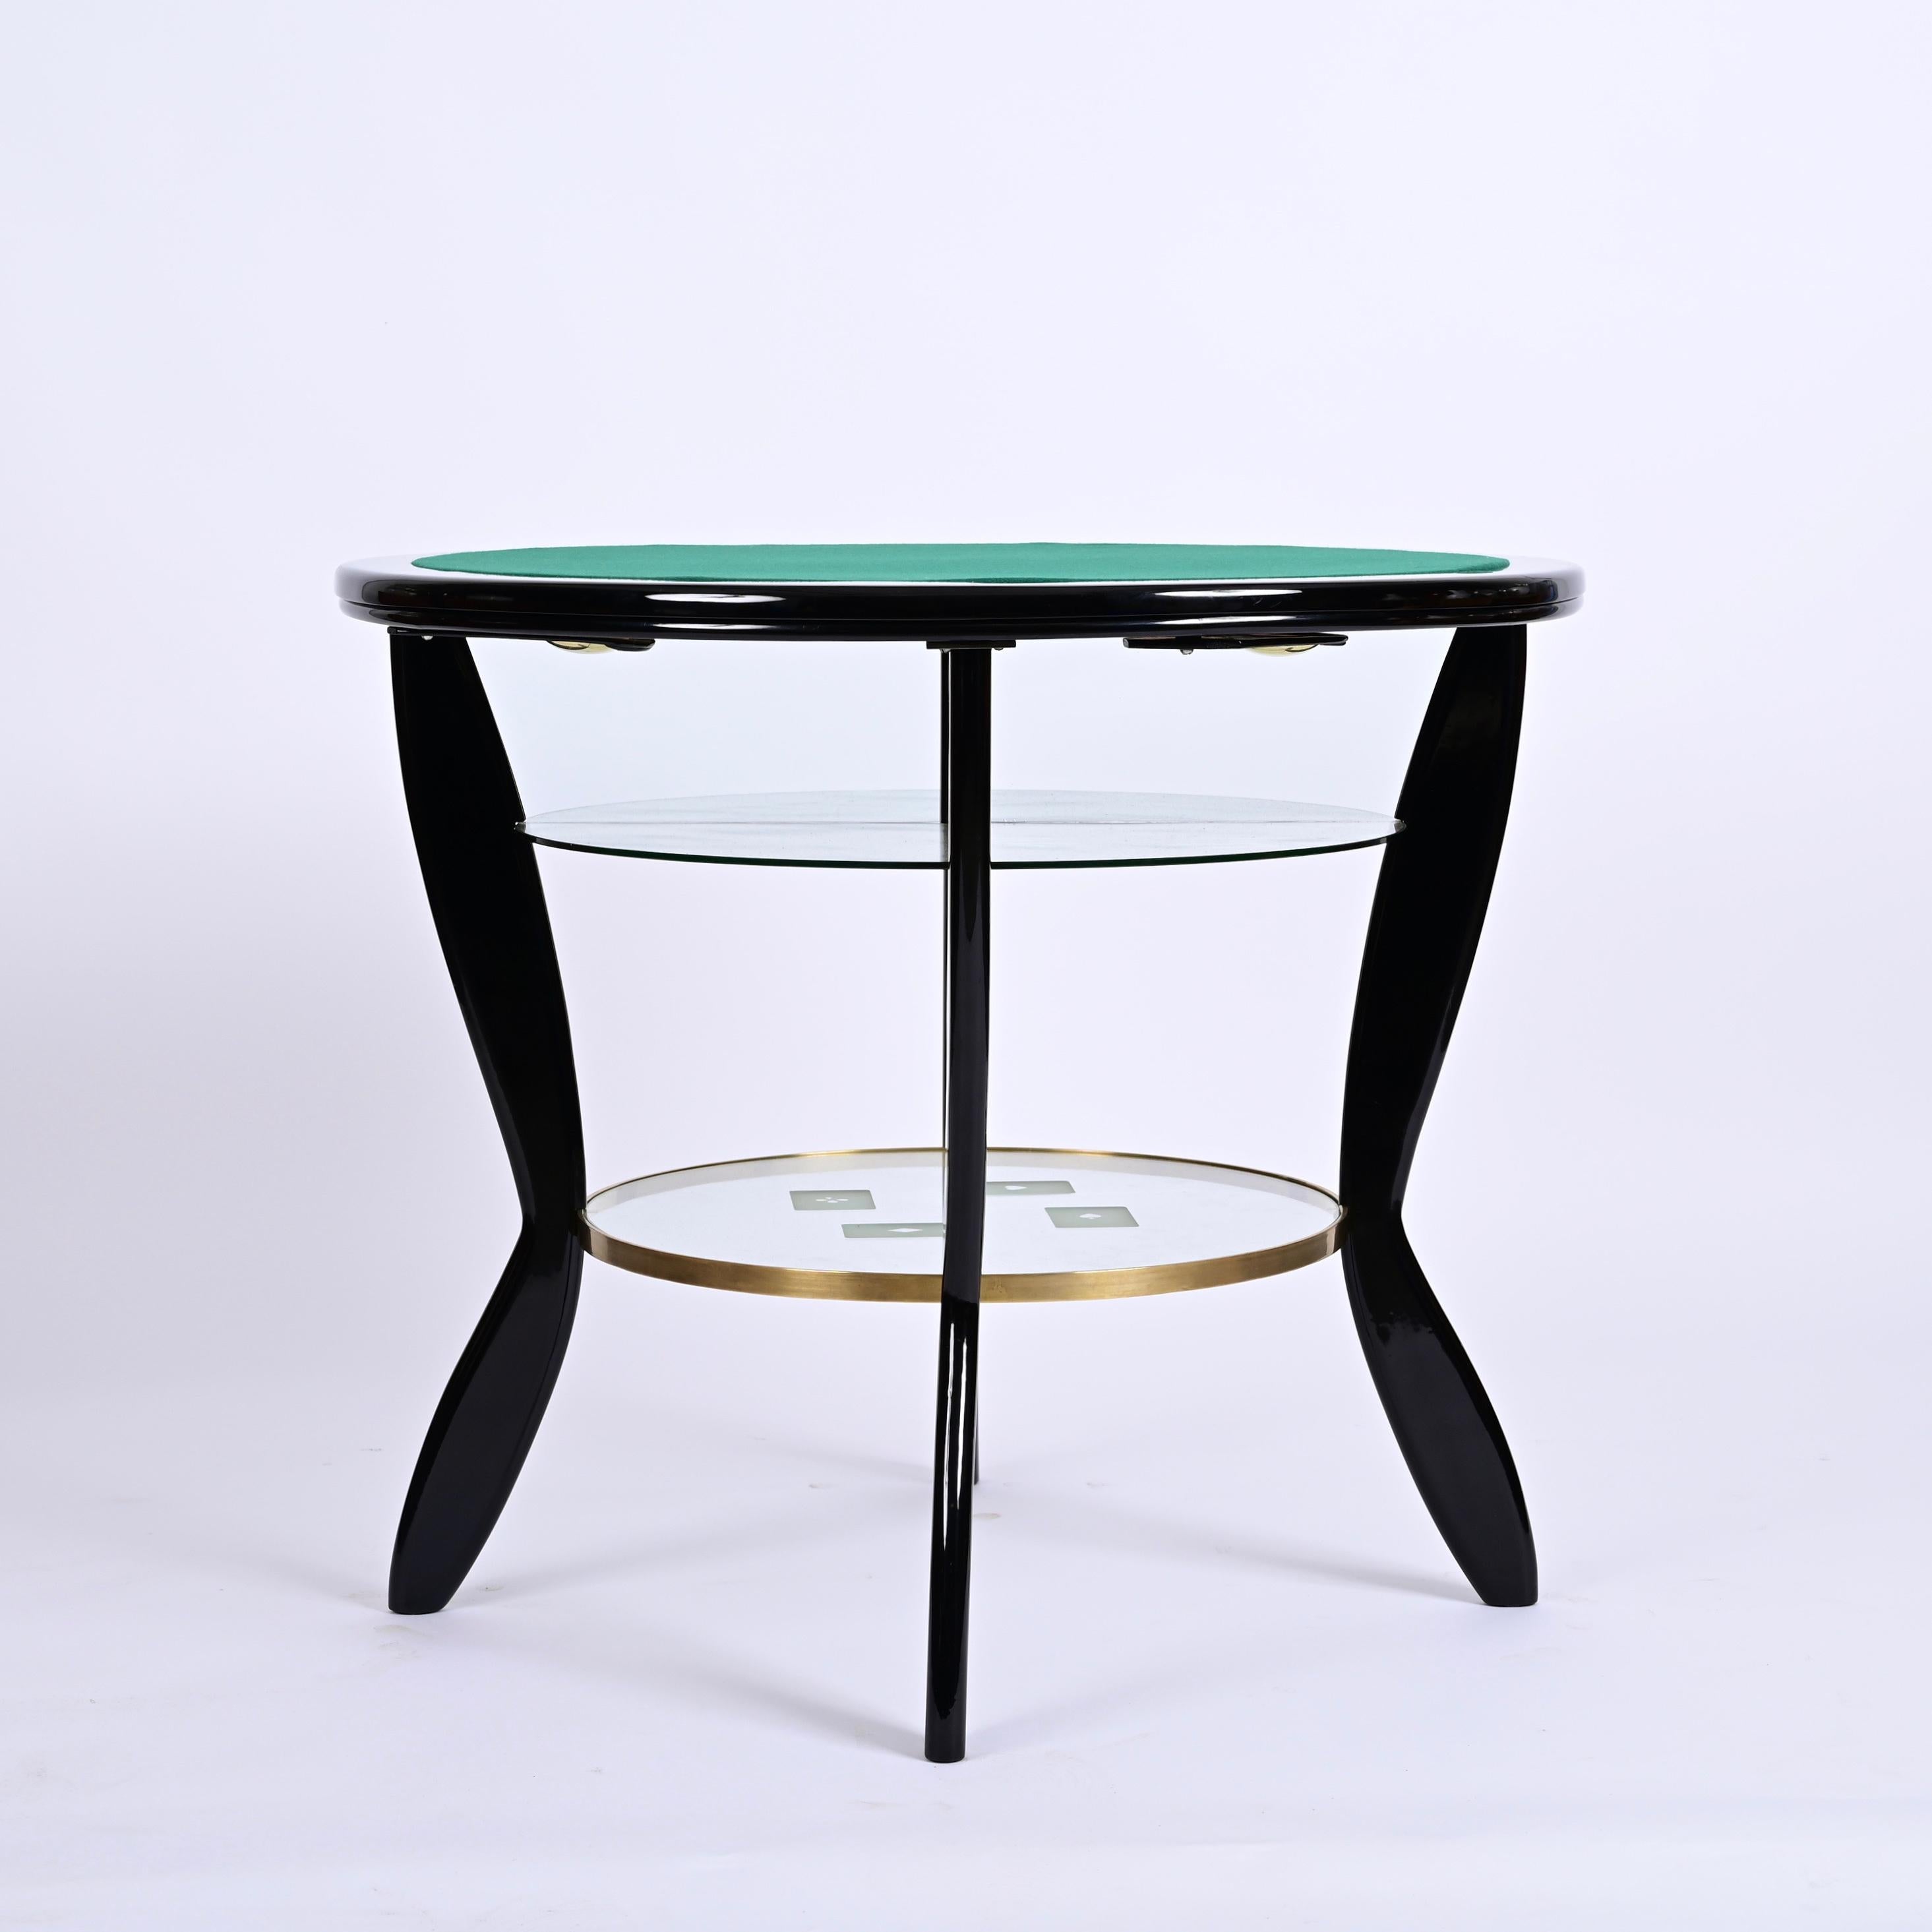 Felt Gio Ponti Style Ebonized Beech and Brass Italian Game Table with Glass, 1950s For Sale